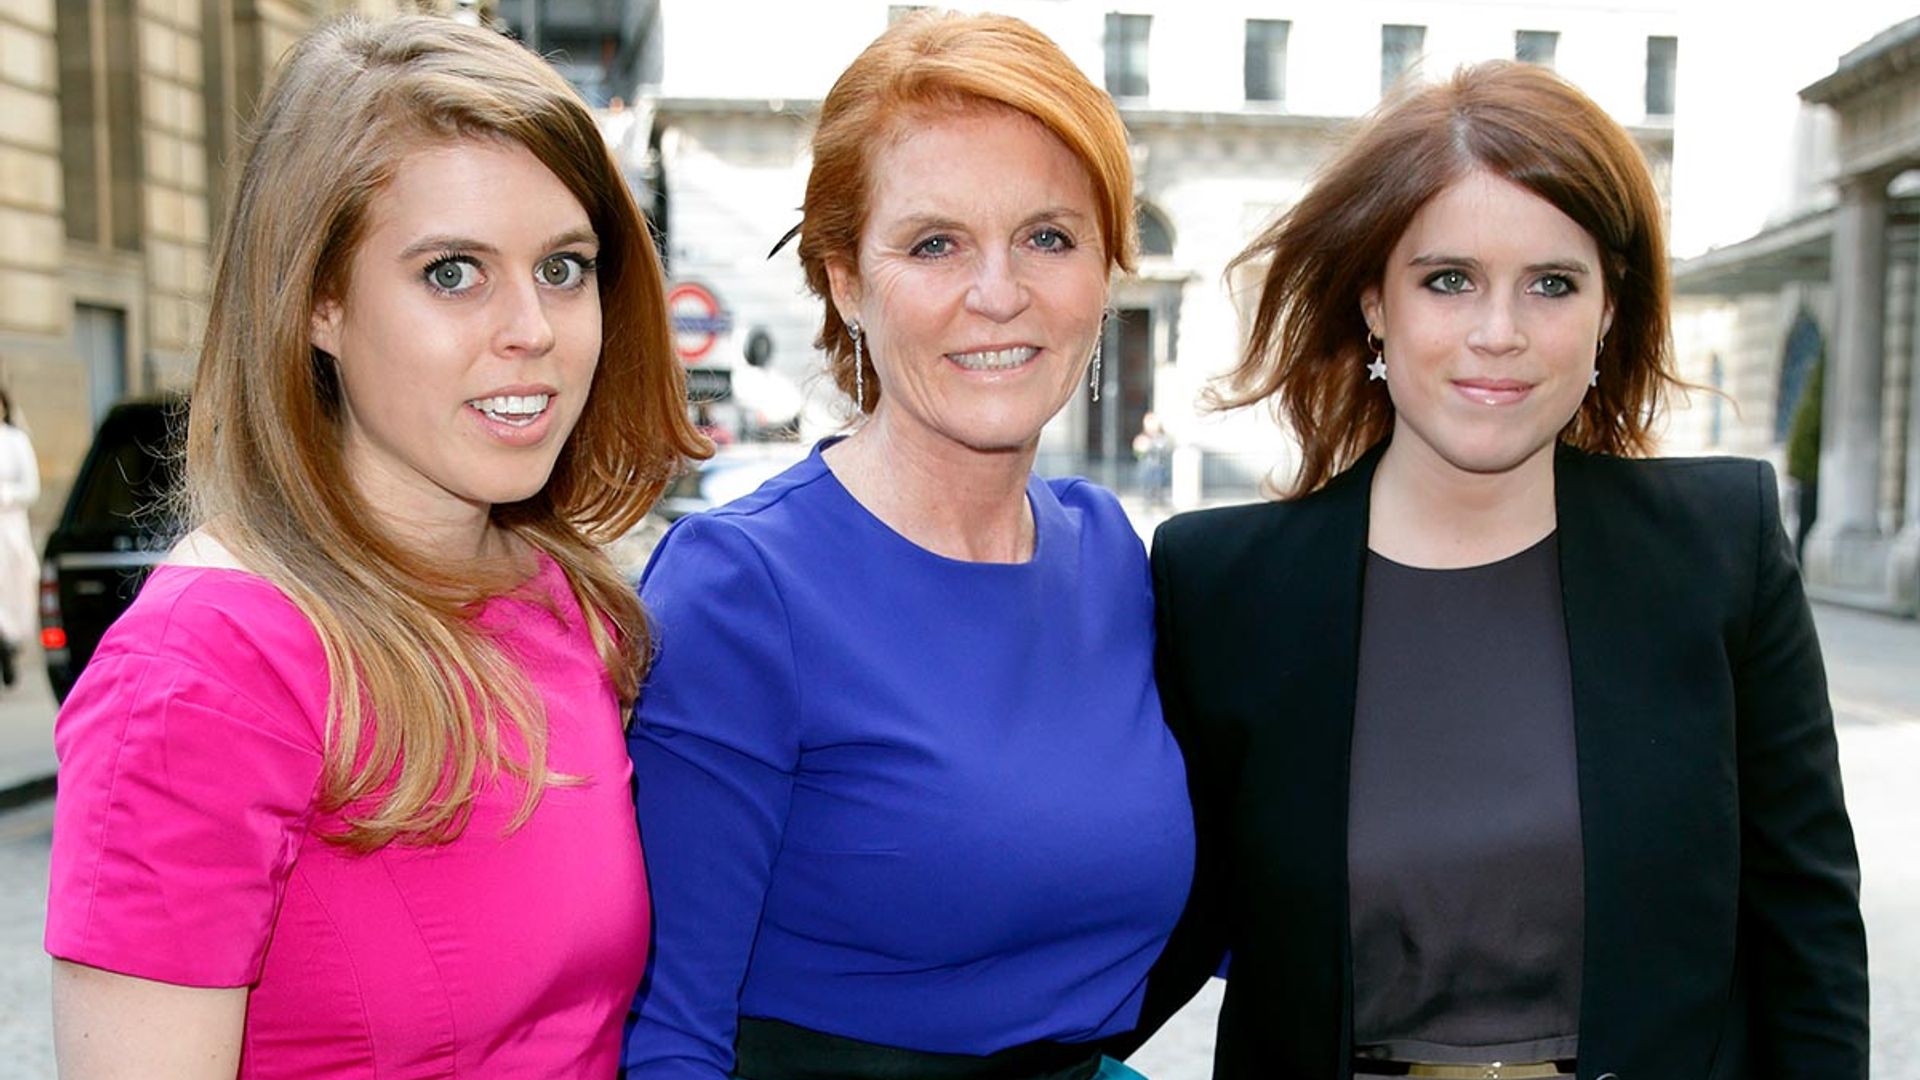 Sarah Ferguson shares adorable details about her royal grandchildren August and Sienna